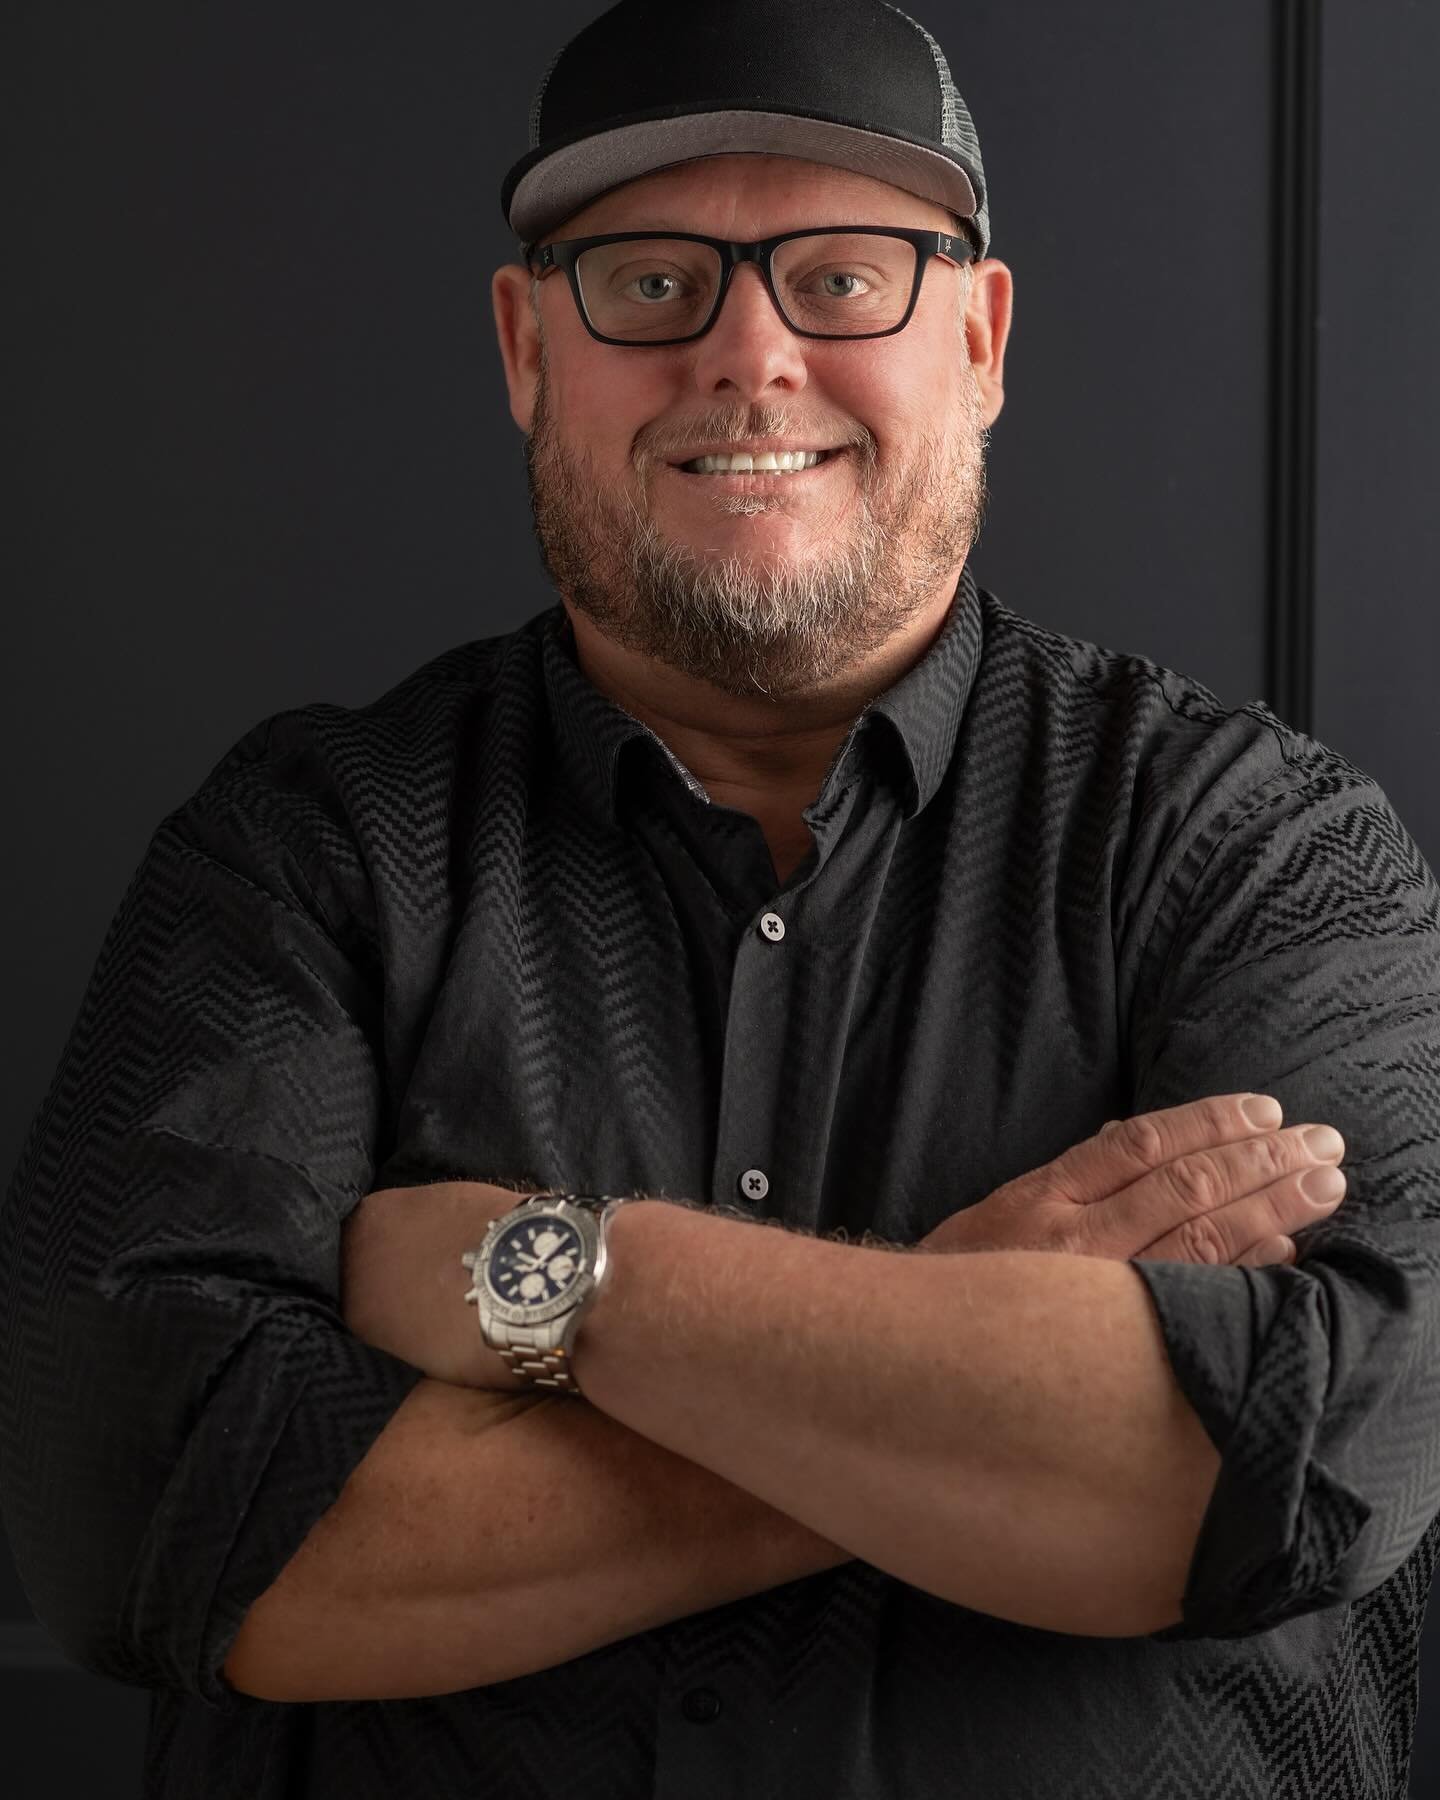 A passing of the baton - today, celebrity Chef Scott Conant, and Creation Hospitality, our restaurant&rsquo;s owner, announced a transition in leadership at The Americano in Scottsdale and Mora Italian in Phoenix. 
The restaurants will remain true to